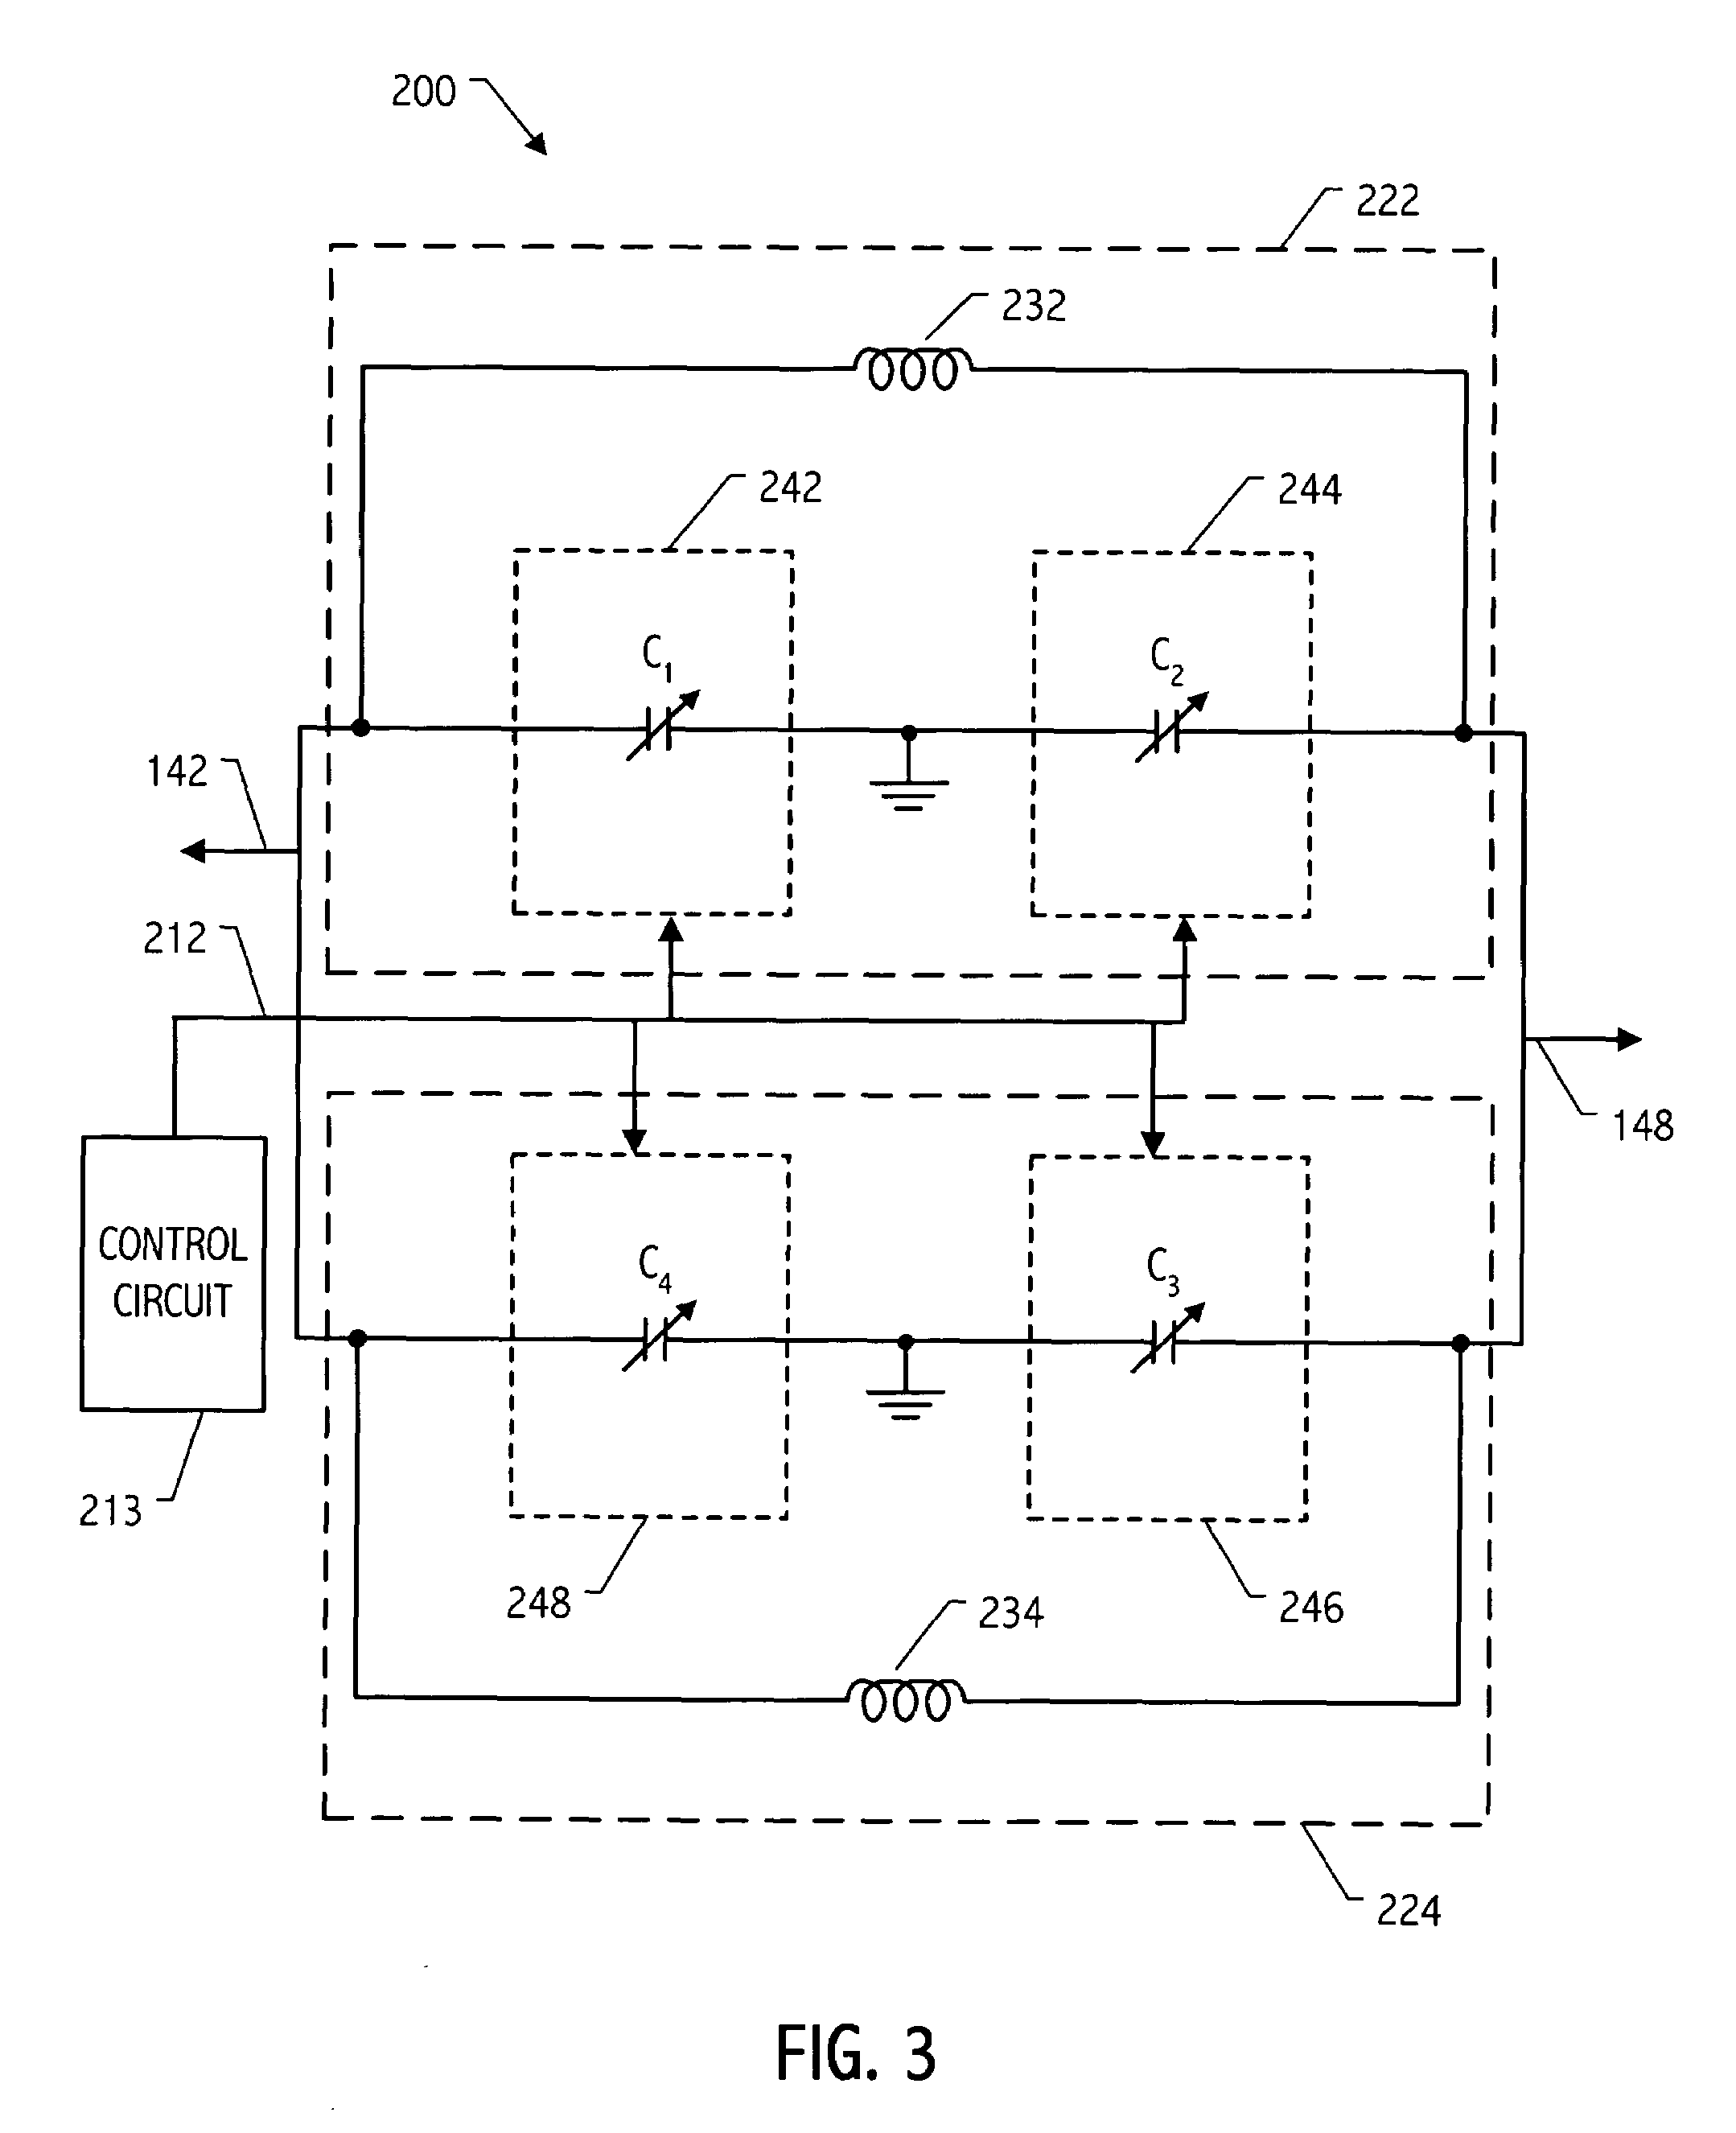 Imbalanced differential circuit control